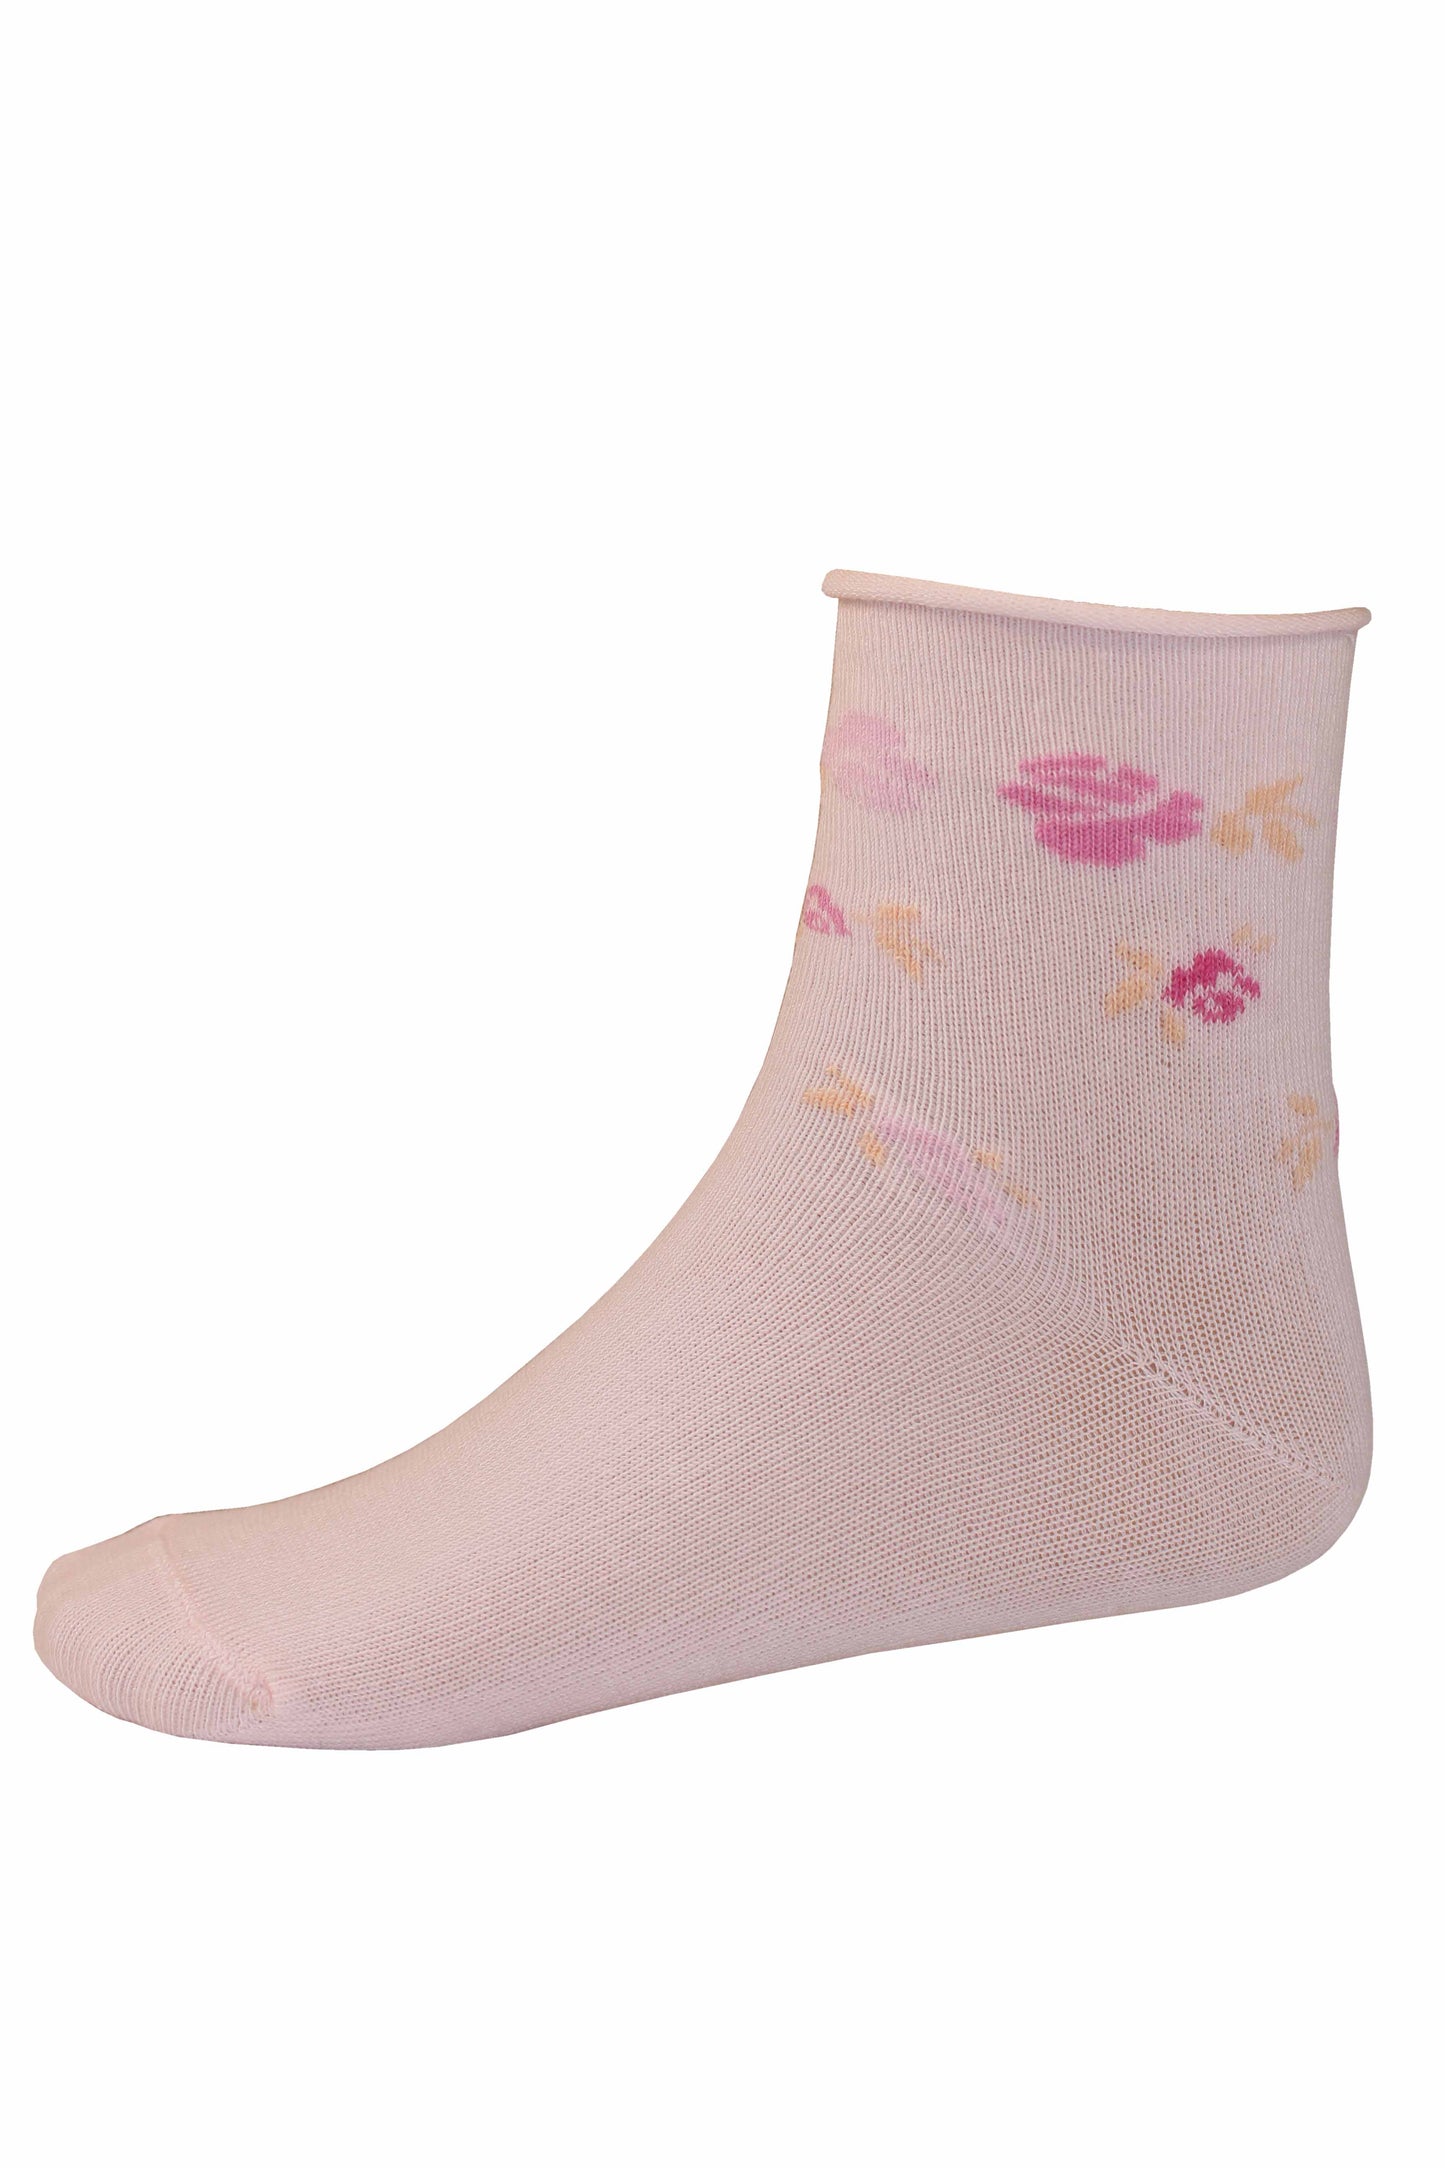 Omsa Serenella Pic Nic Calzino - Light pink children's cotton no cuff cotton ankle socks with a colourful woven floral style pattern around the cuff in shades of pink and orange.